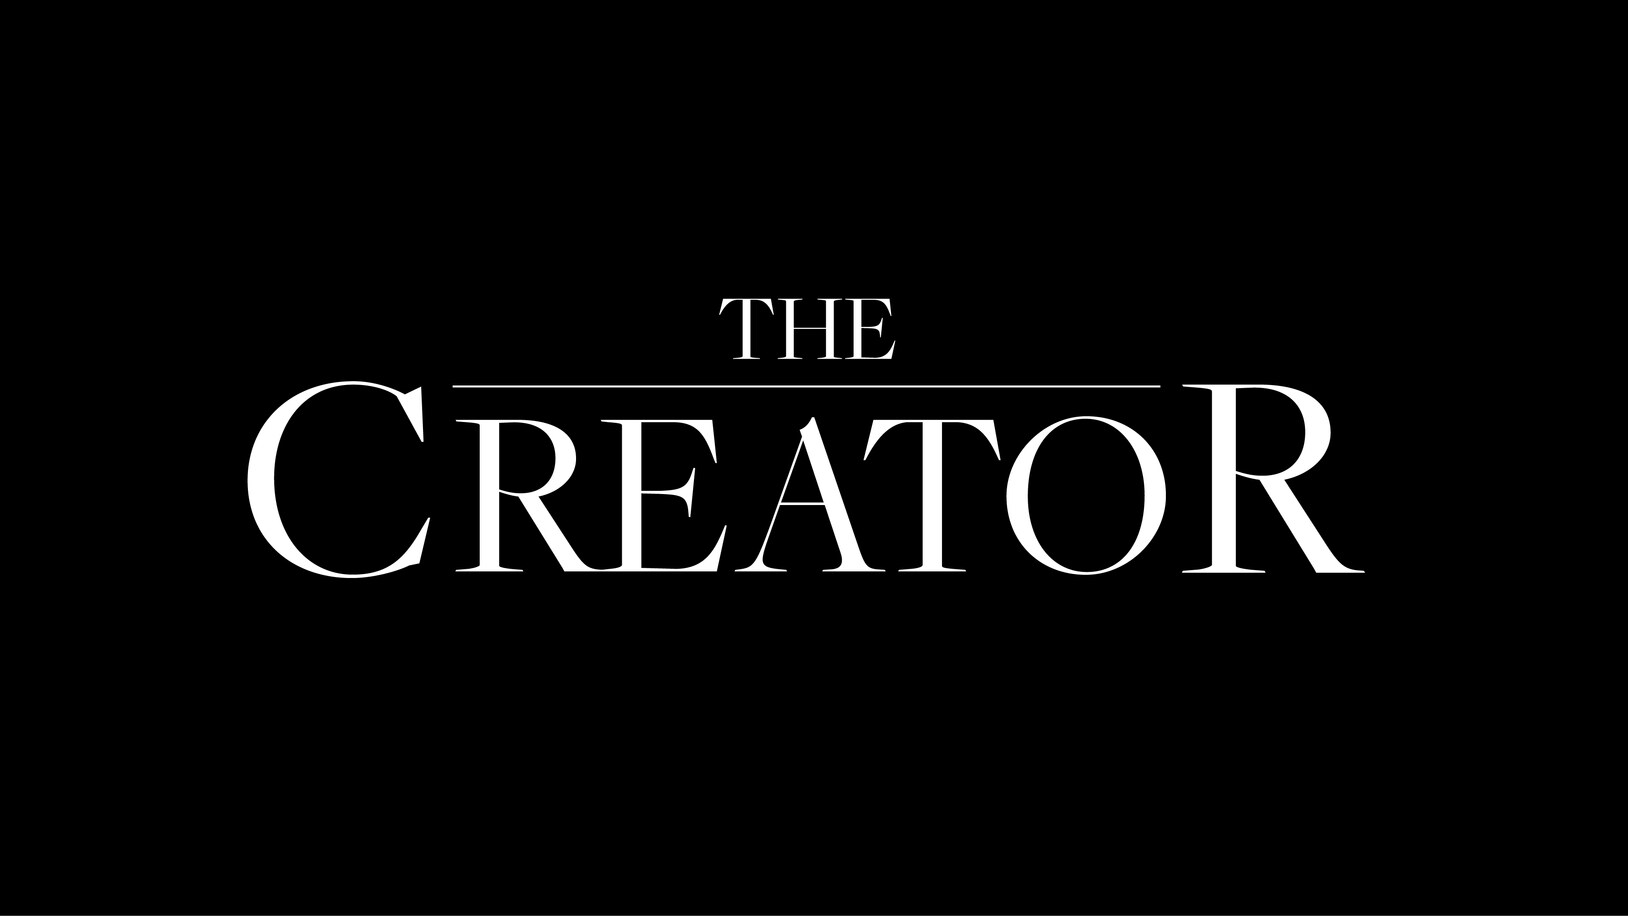 NEW TRAILER FOR “THE CREATOR” AVAILABLE NOW